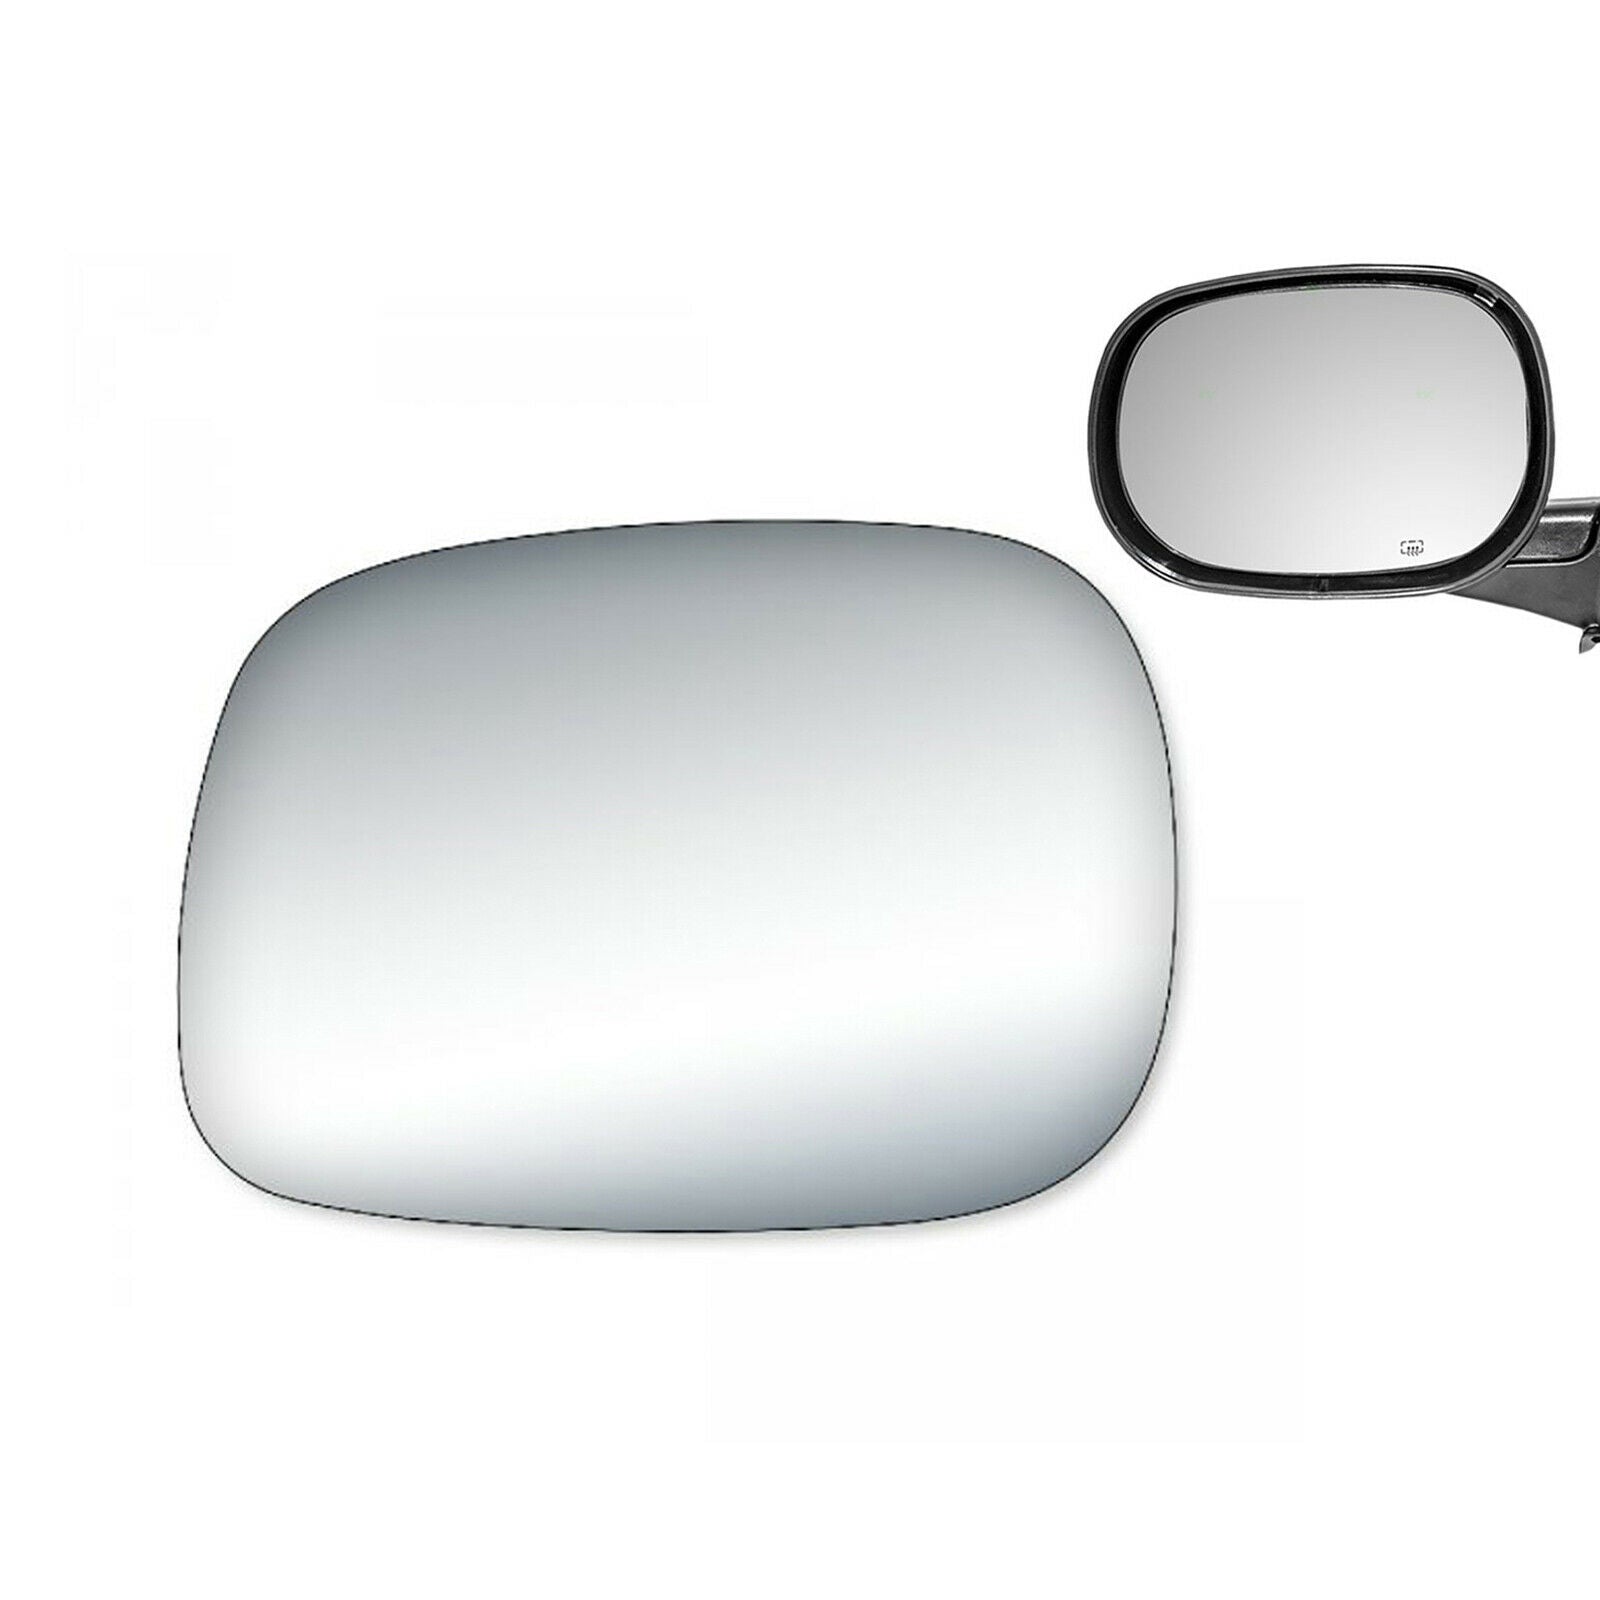 WLLW Replacement Mirror Glass for 2002-2008 Dodge Ram Pickup Full Size, Driver Left Side LH/Passenger Right Side RH/The Both Sides Flat Convex M-0003